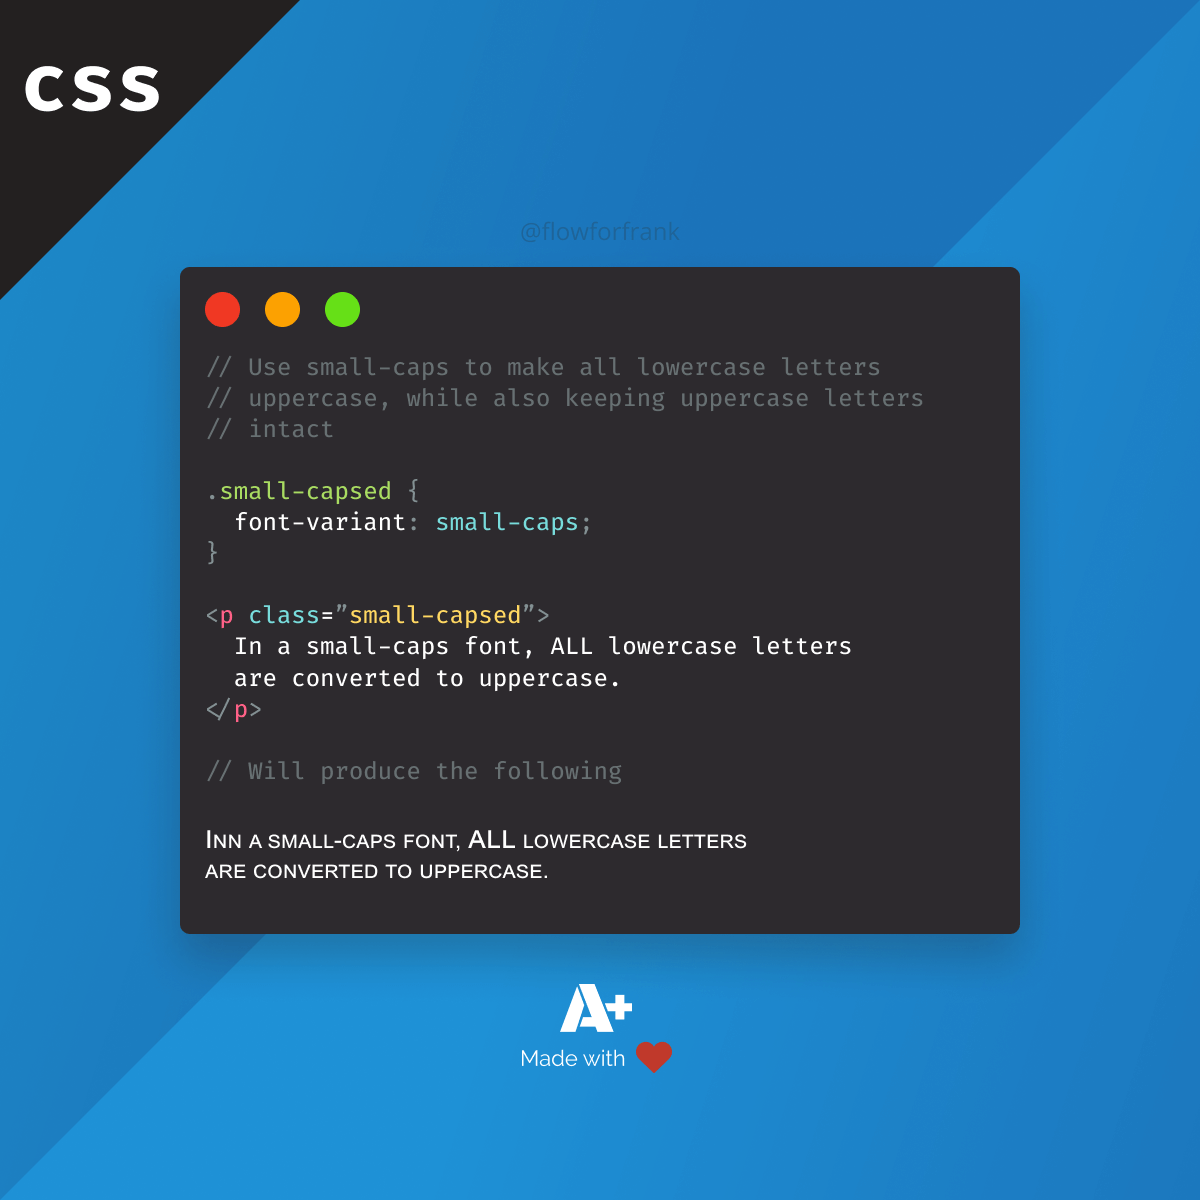 The small-caps Value in CSS